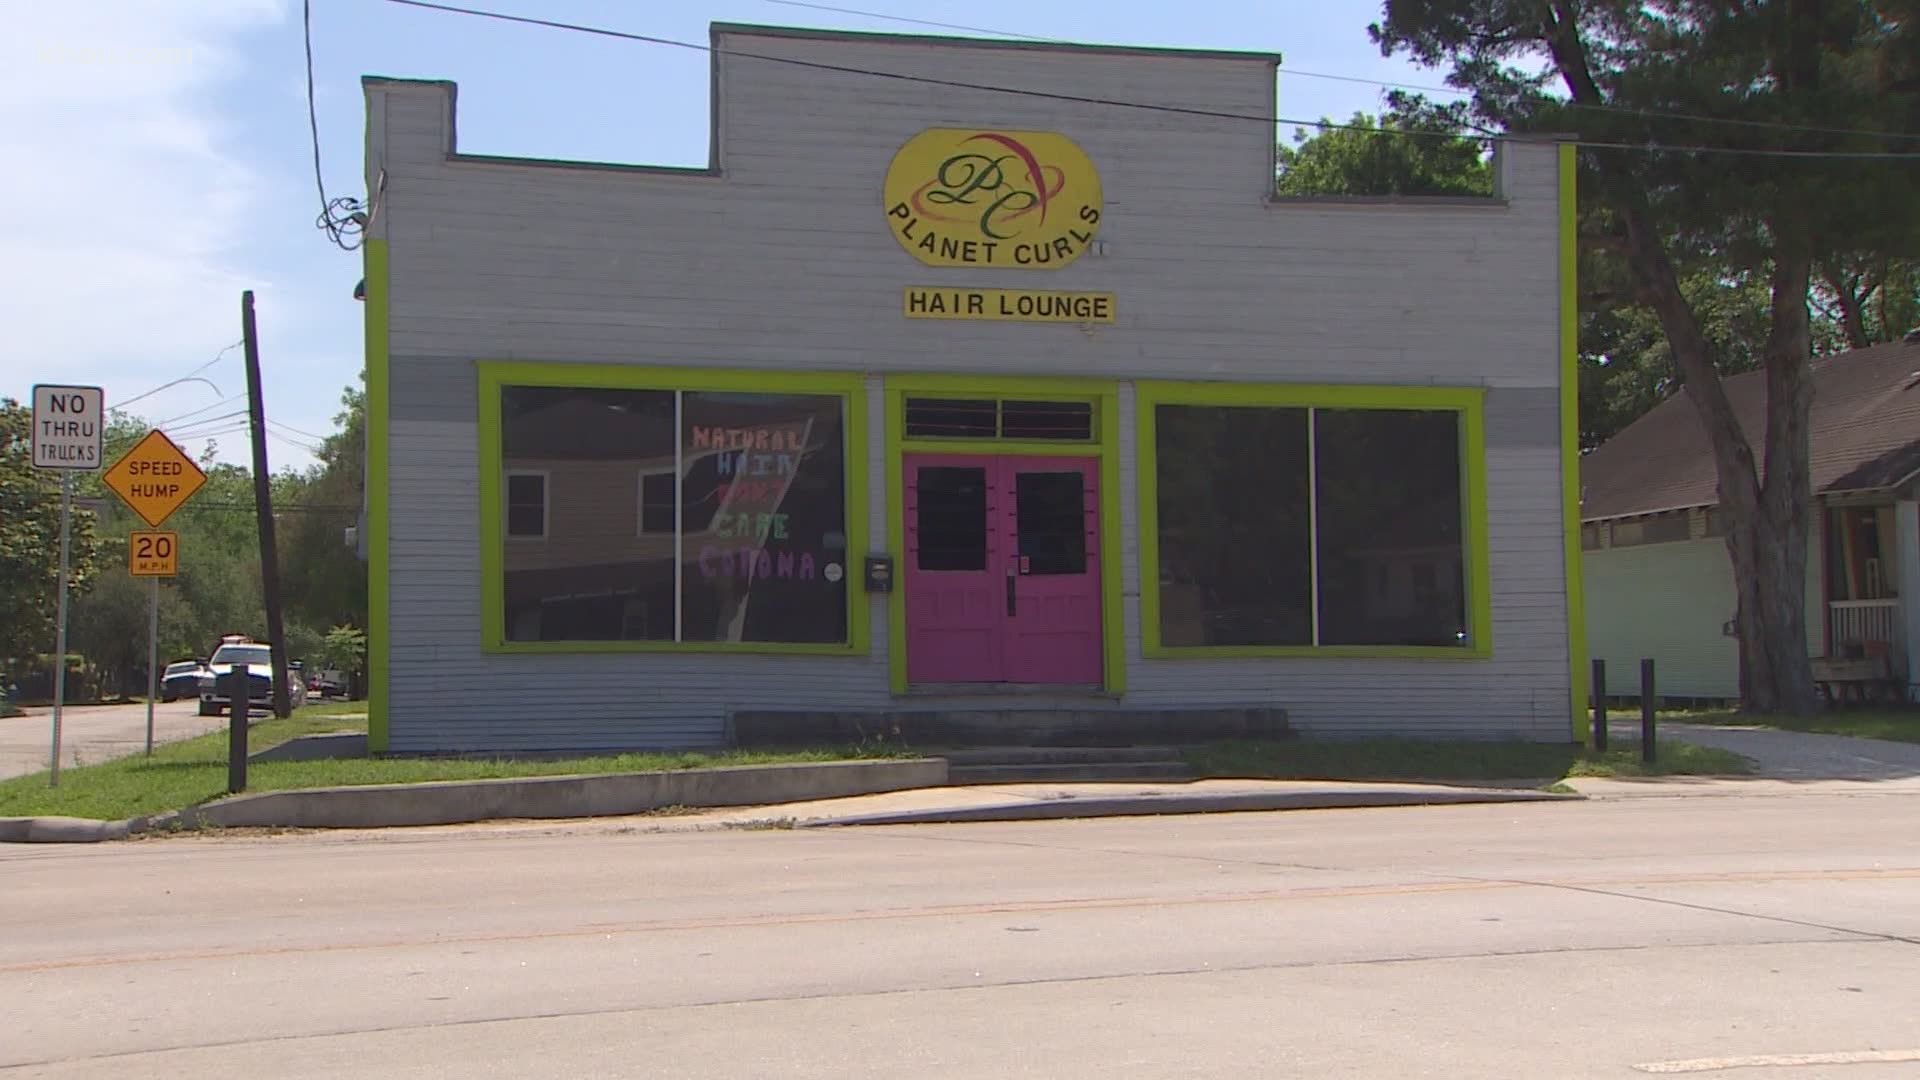 KHOU 11 visits a Houston beauty salon, where like their industry peers, stylists are working on safe ways to service customers before reopening.